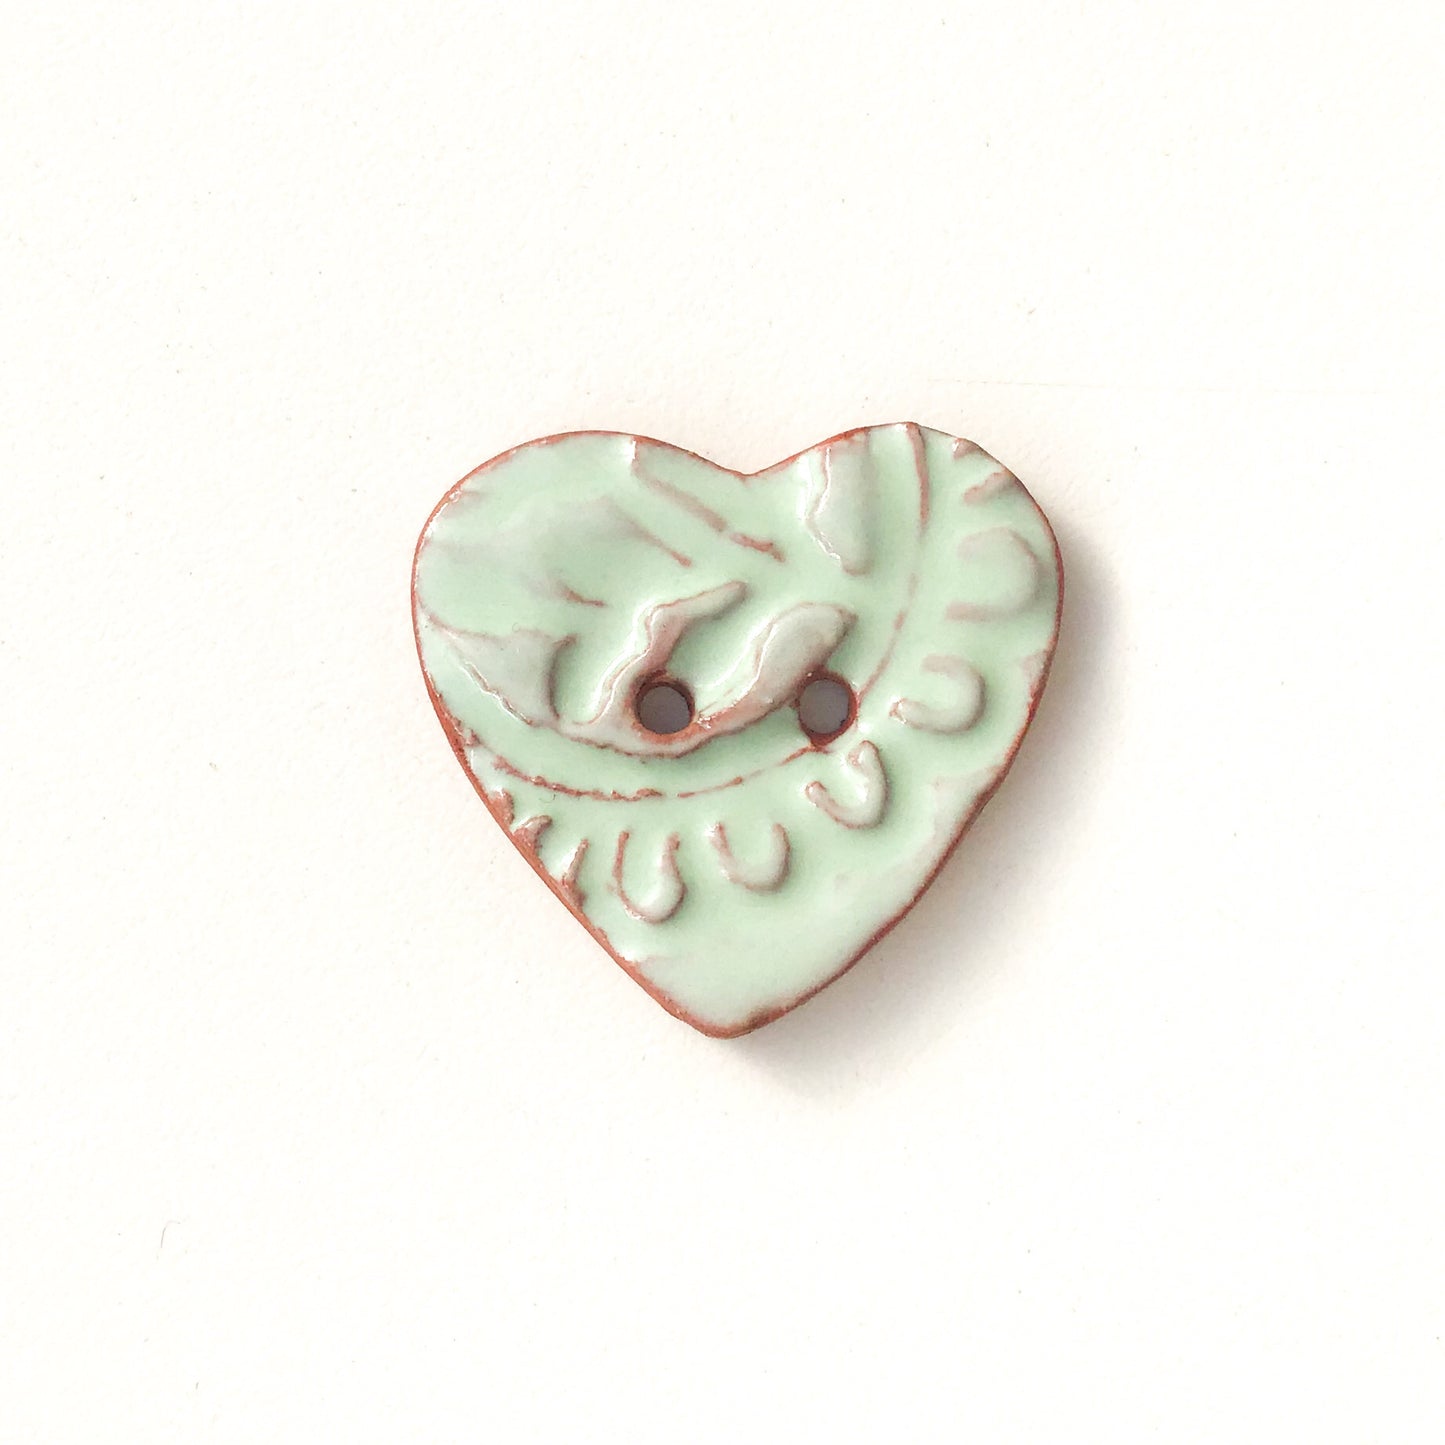 Stamped Heart Buttons - Ceramic Heart Buttons -1 3/16"